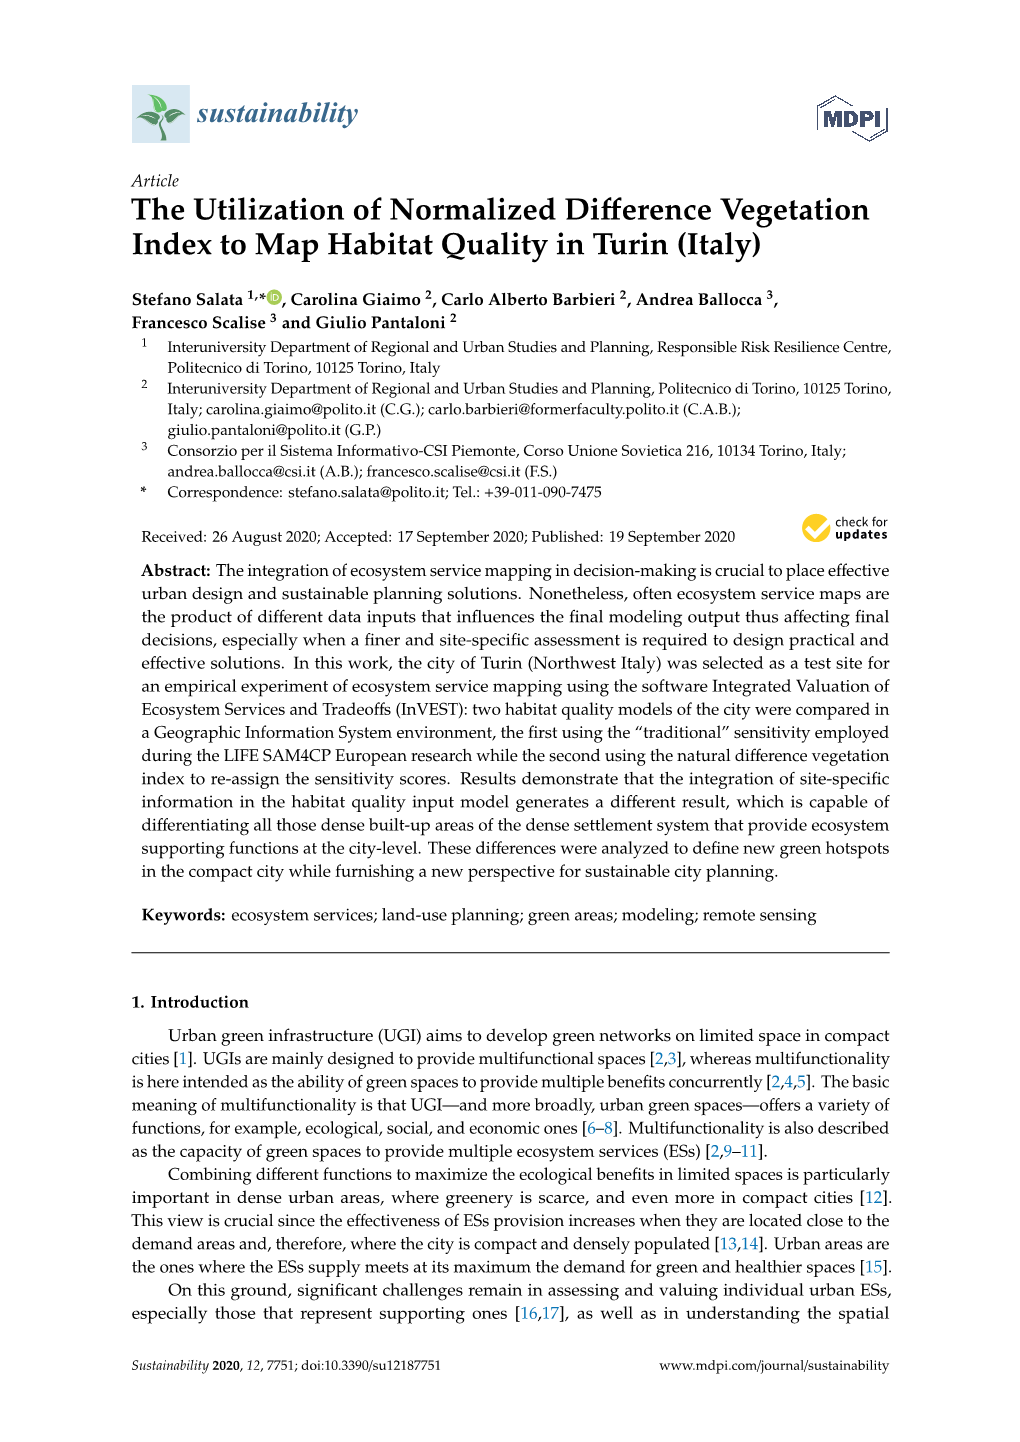 The Utilization of Normalized Difference Vegetation Index to Map Habitat Quality in Turin